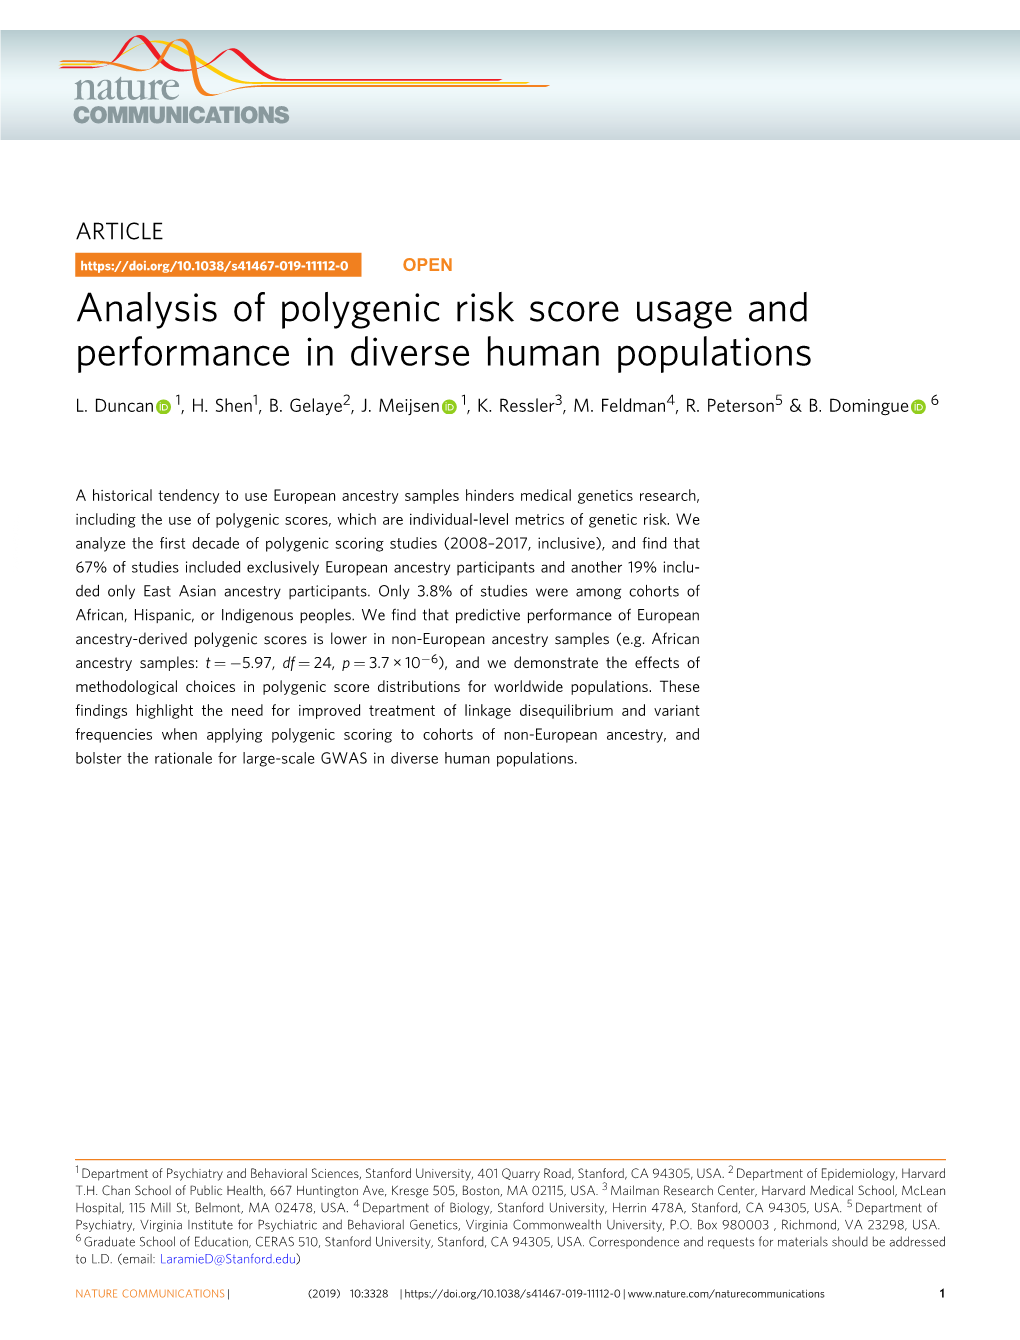 Analysis of Polygenic Risk Score Usage and Performance in Diverse Human Populations